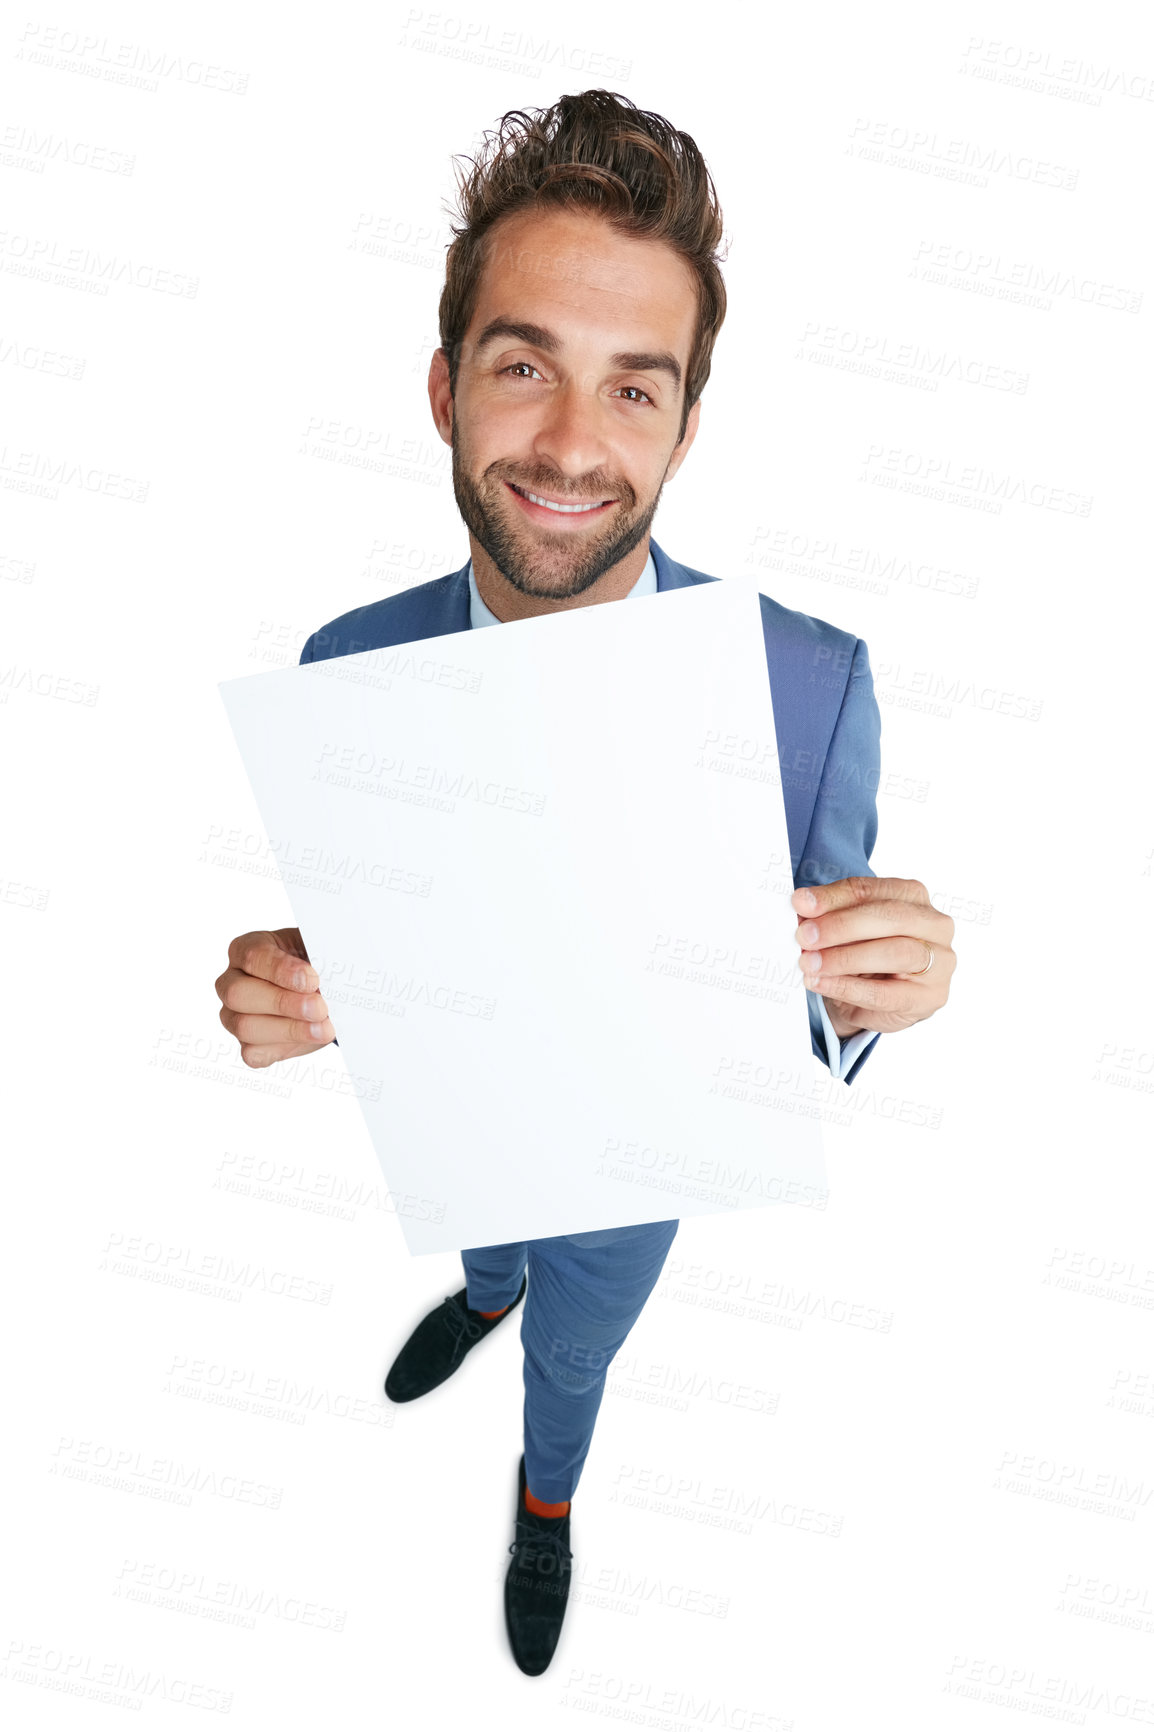 Buy stock photo Studio shot of a handsome businessman holding up a blank placard against a white background